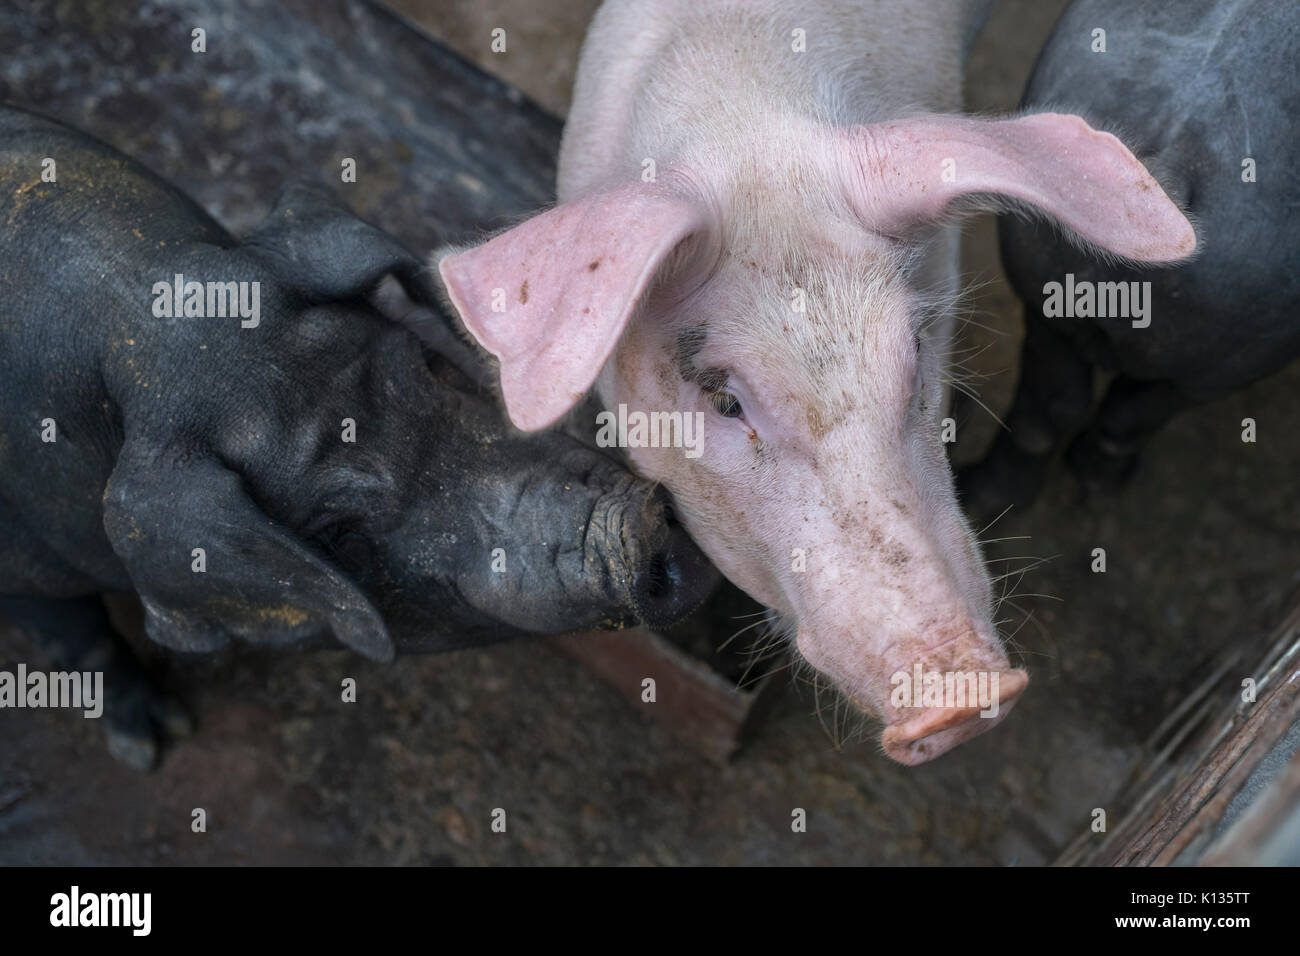 Hybrid breed of pigs at a domestic pig farm which are wild boar hybridizing with the domestic pig in Huairou, Beijing, China. 24-Aug-2017 Stock Photo